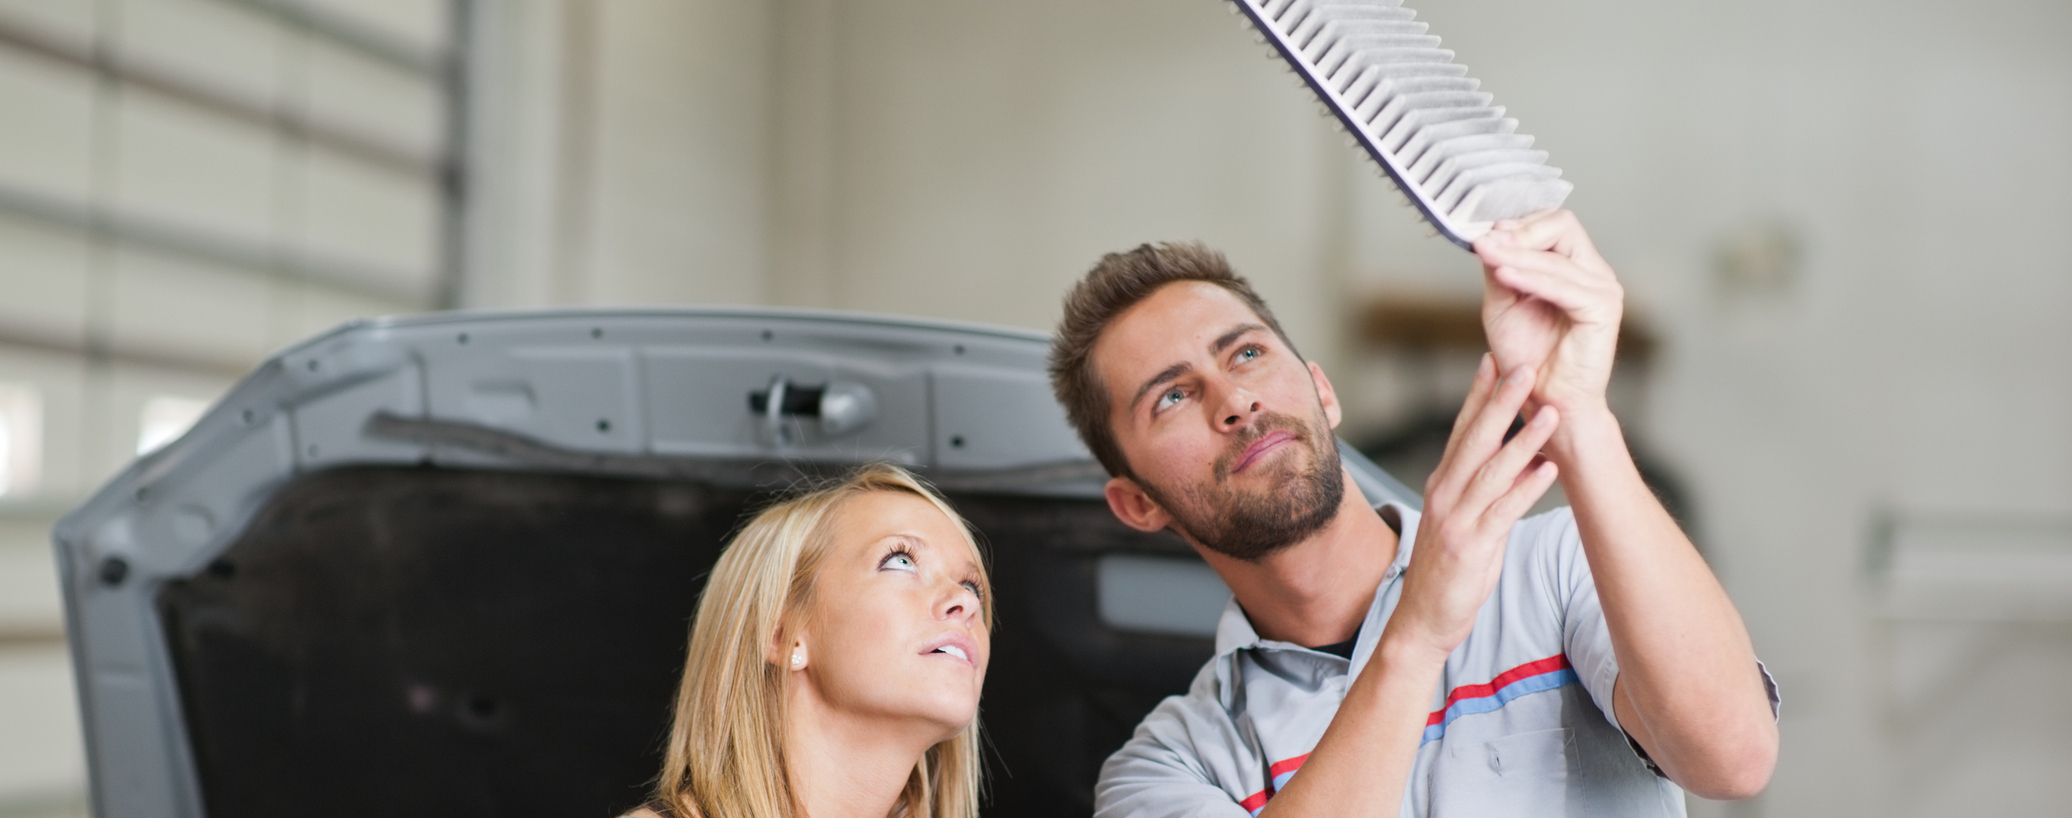 Cabin Air Filter Replacement near Pittsburgh, PA